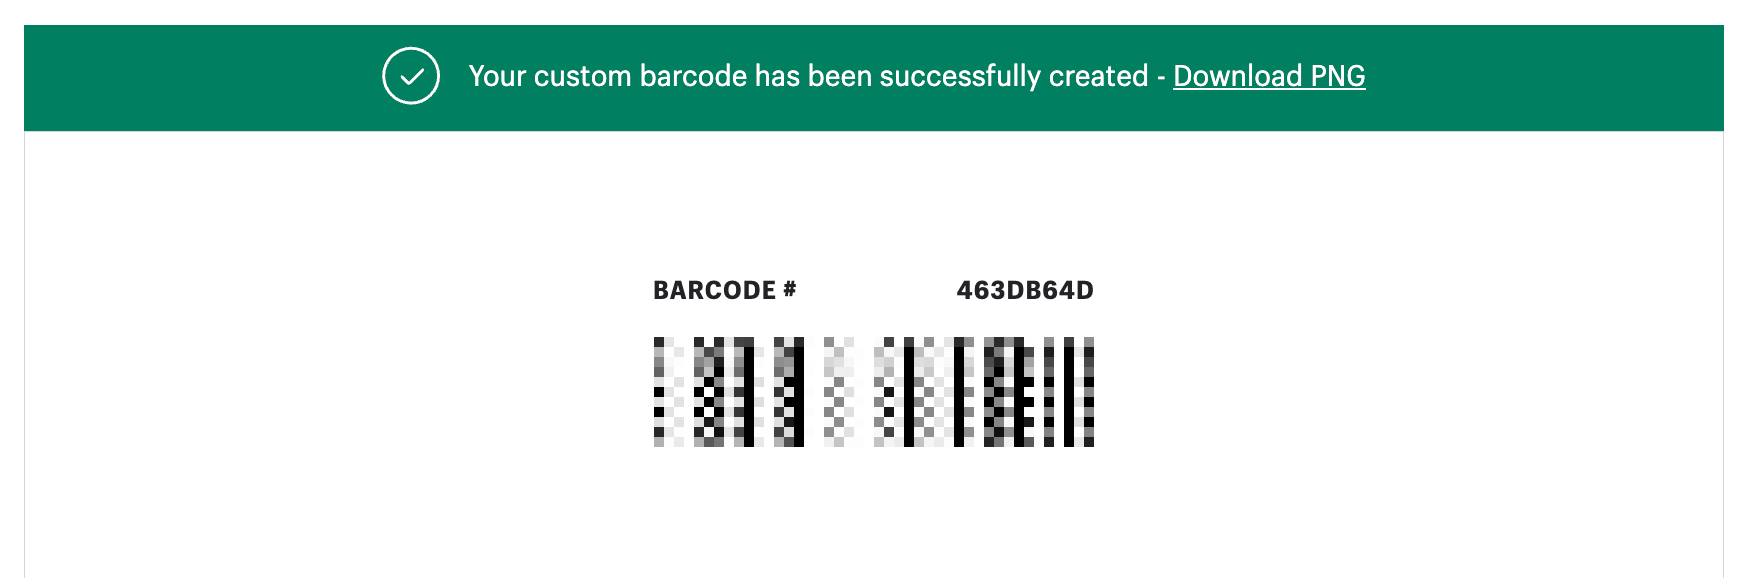 Example barcode number created with Shopify’s free tool.